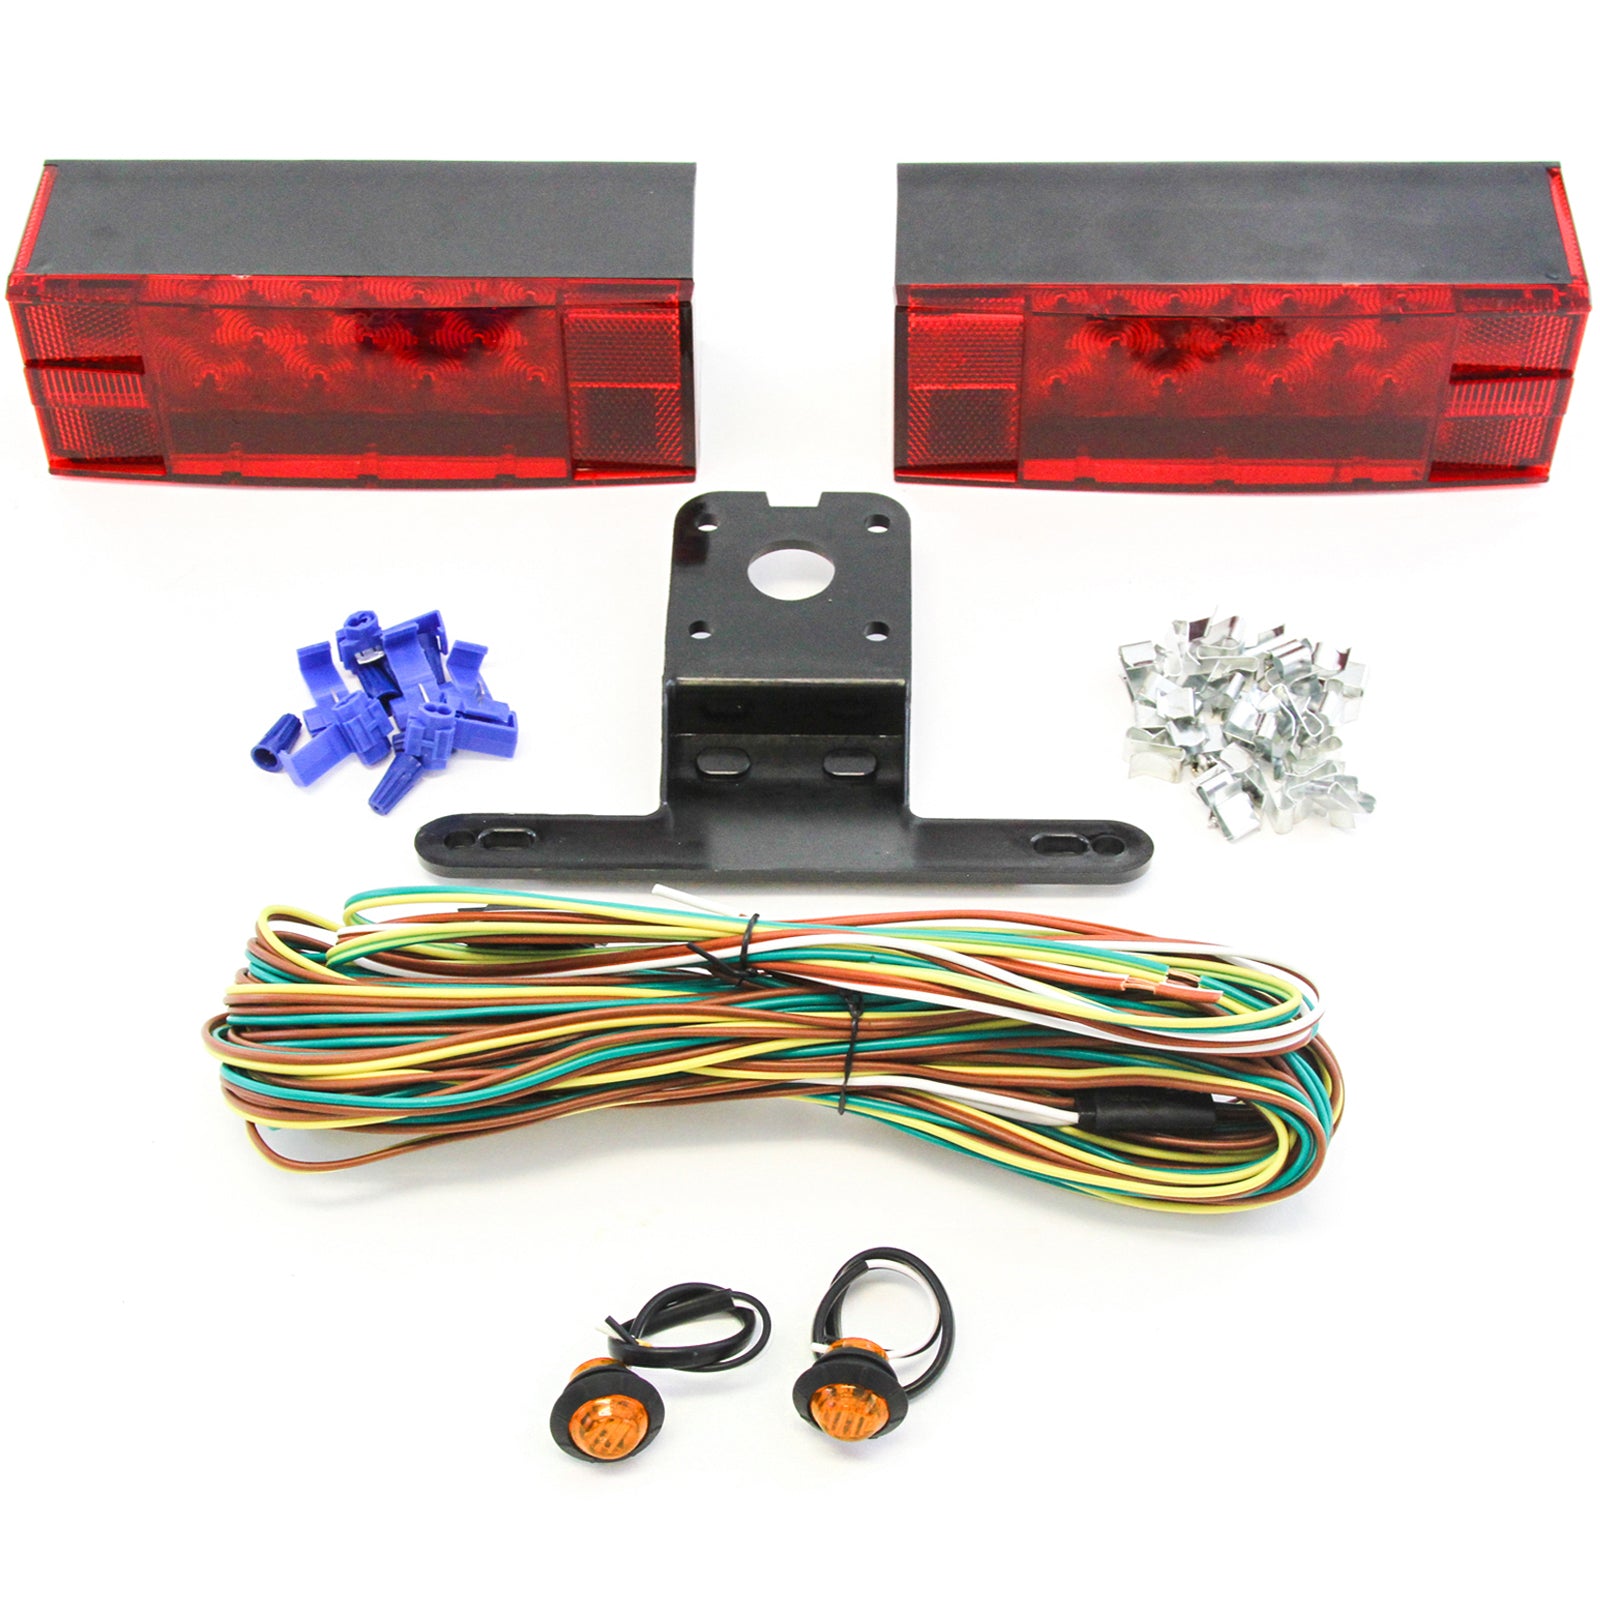 Red Hound Auto LED Submersible Low Profile Rectangle Light Kit Boat Marine & 2 Amber Side Marker